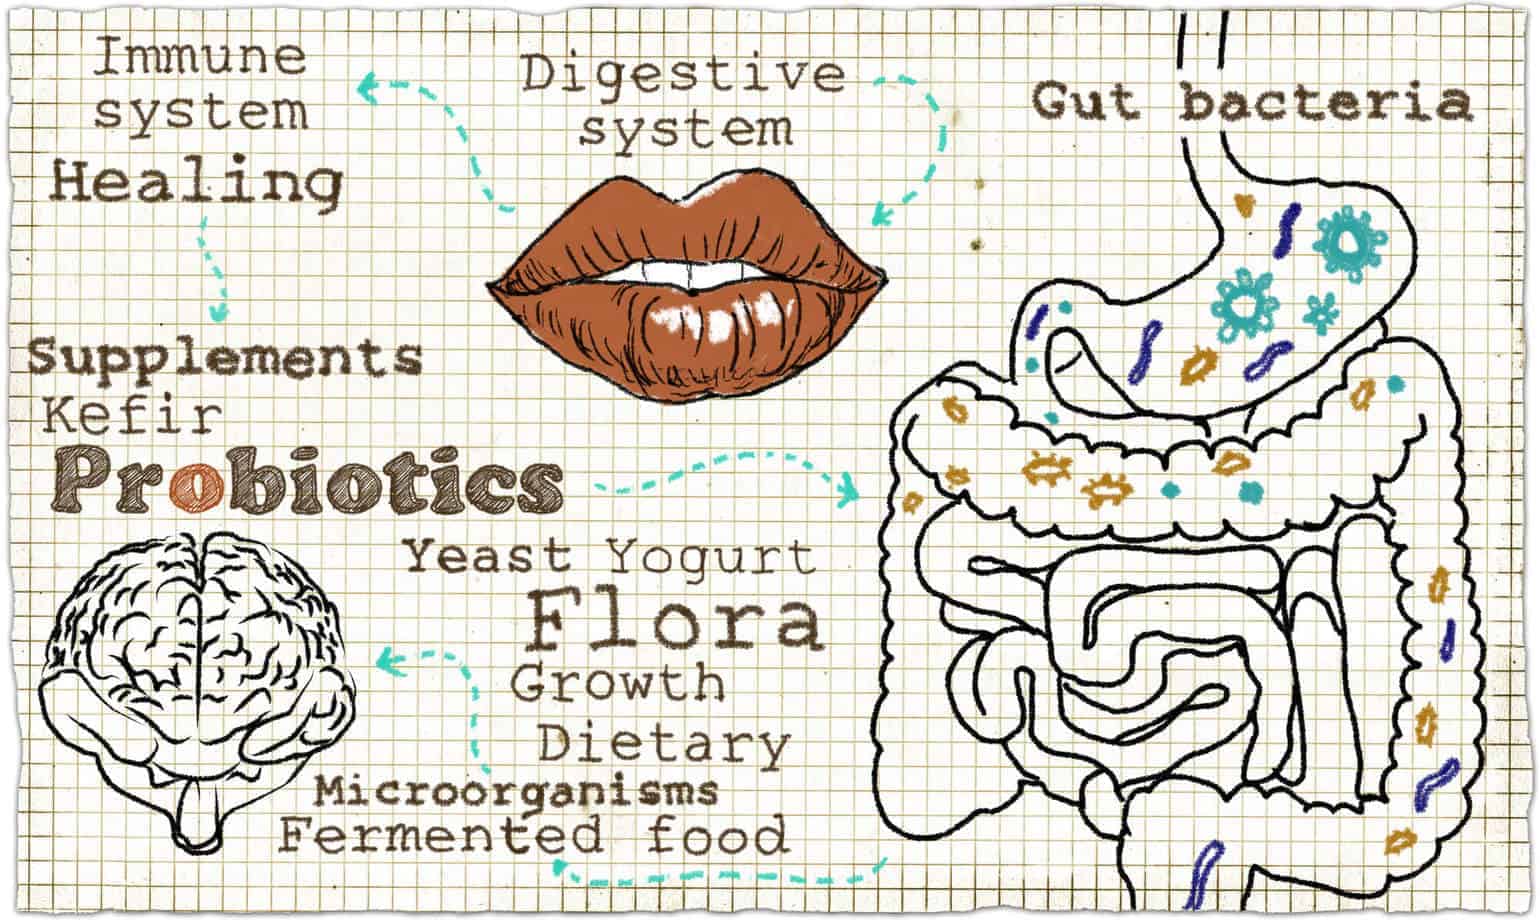 Probiotics vs prebiotics. What exactly is the difference anyway?